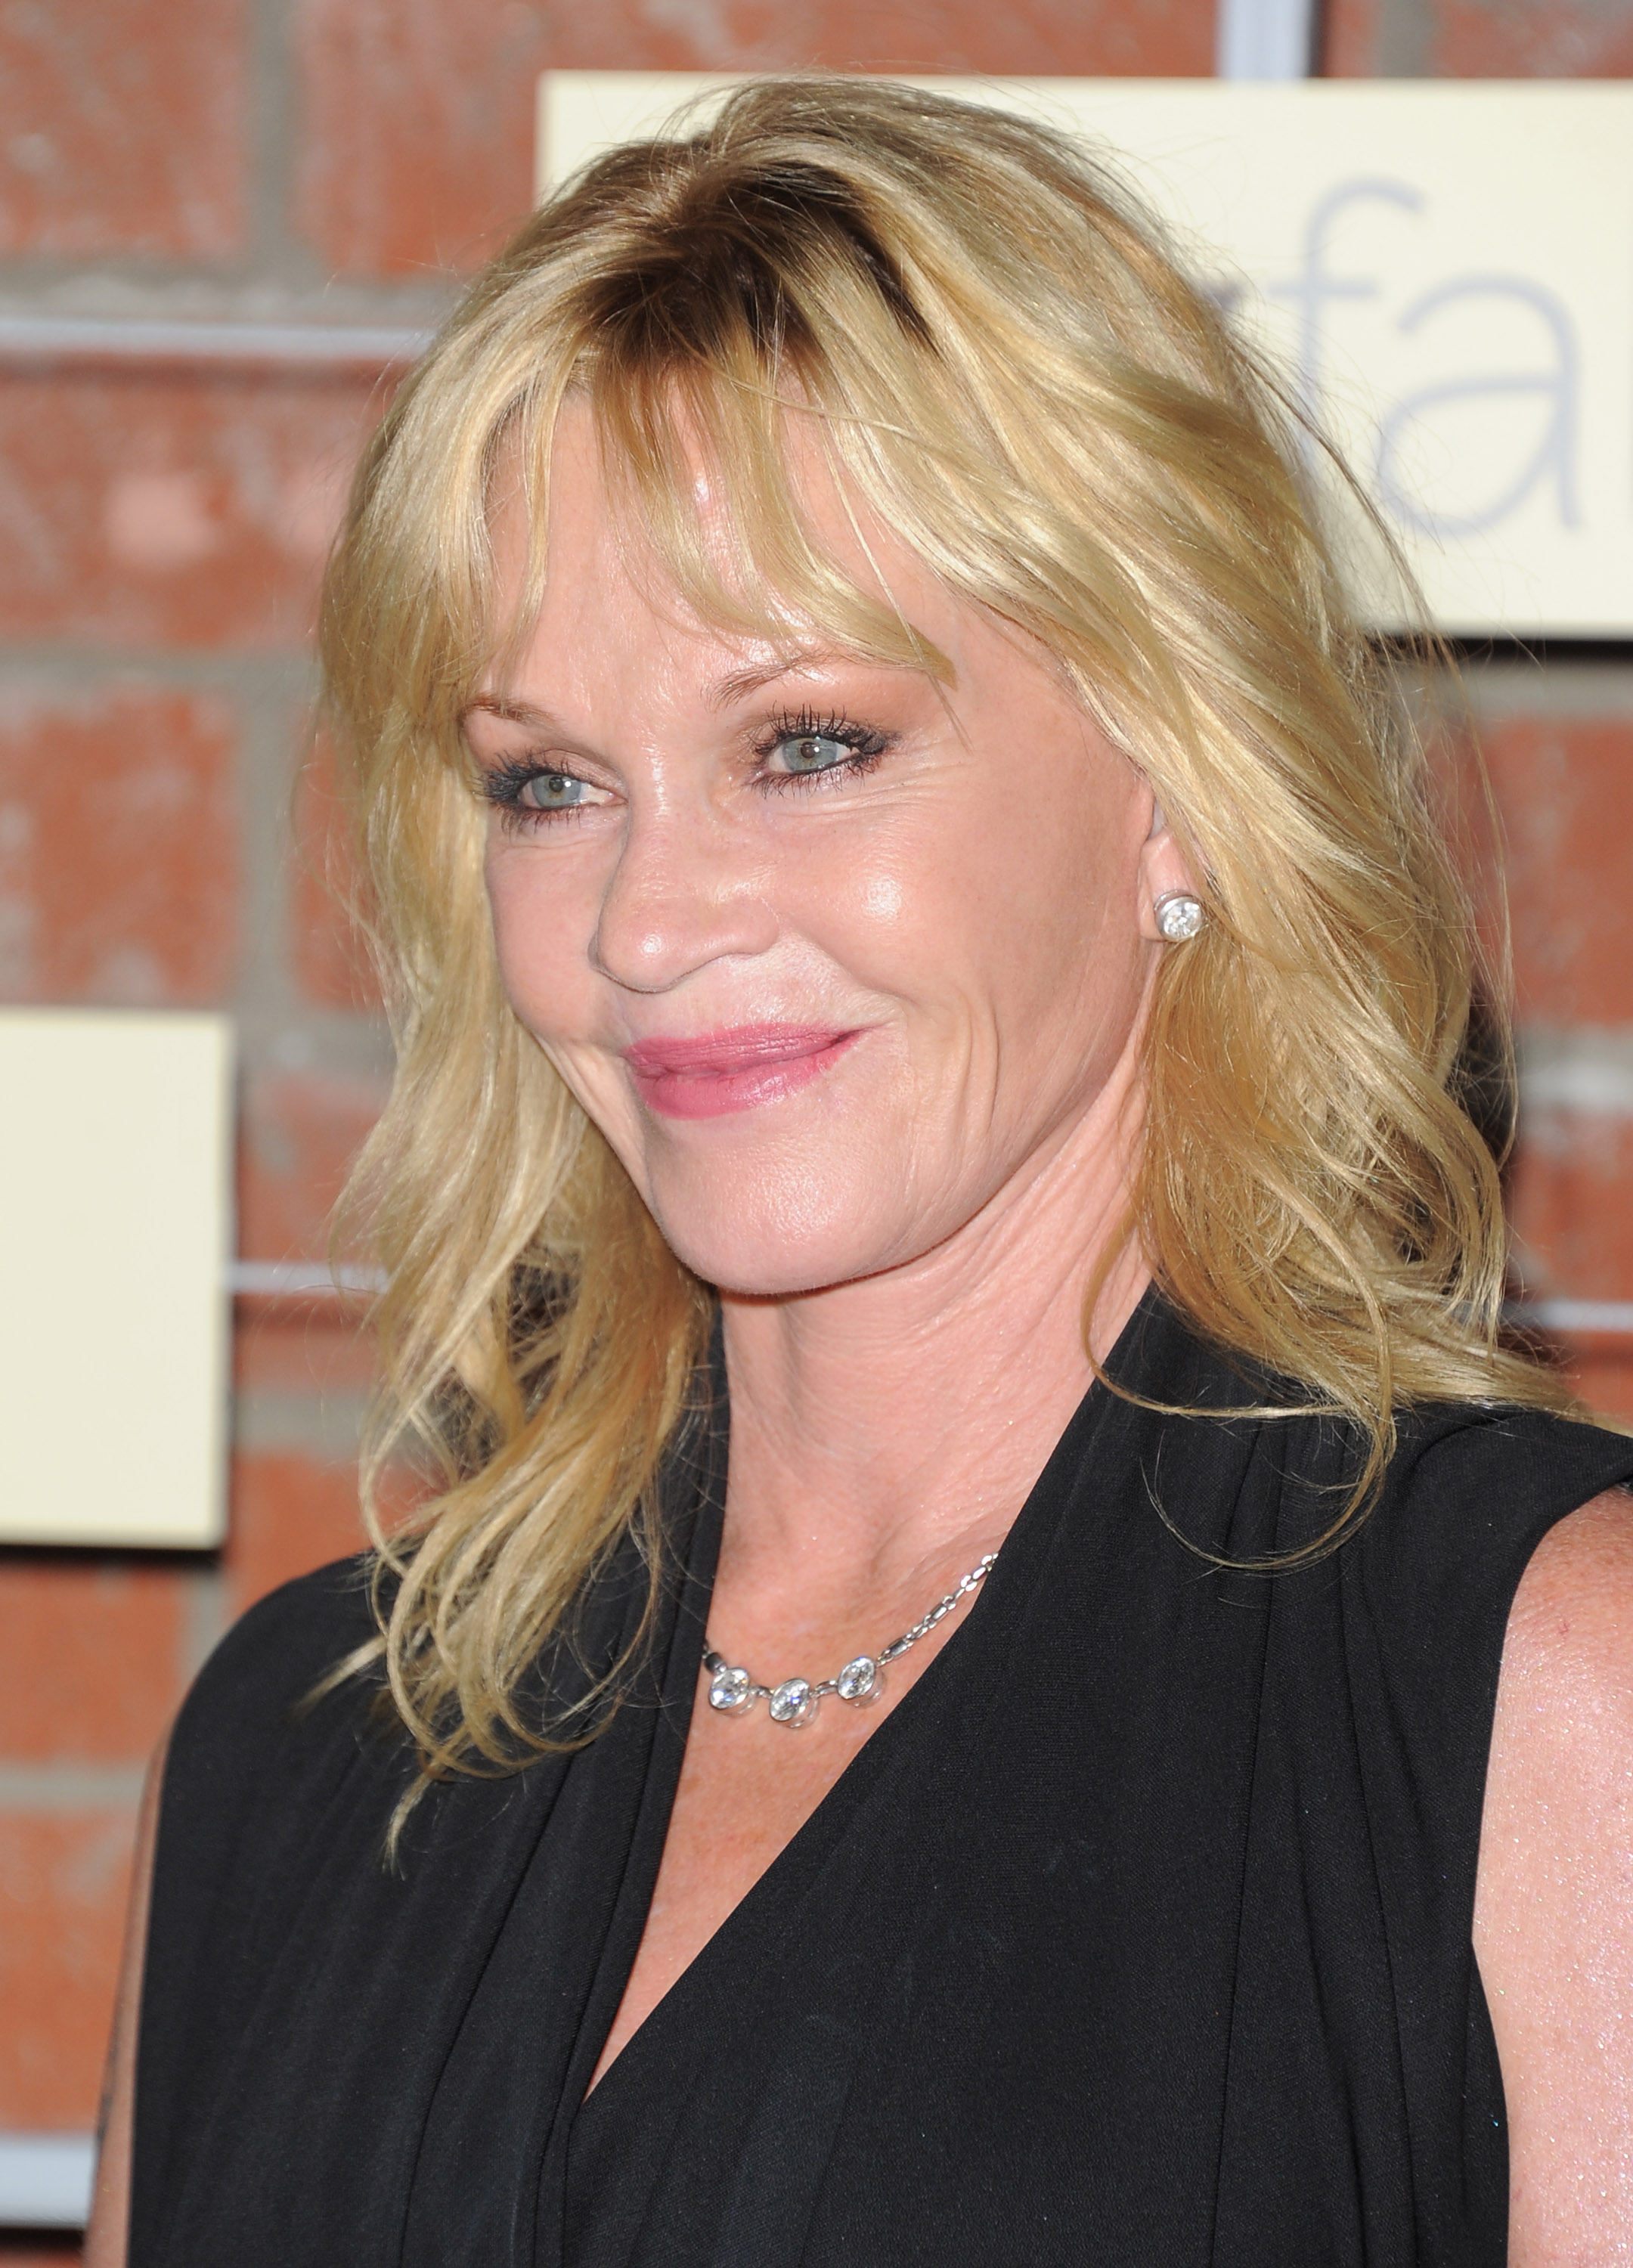 Melanie Griffith Images on Fanpop.